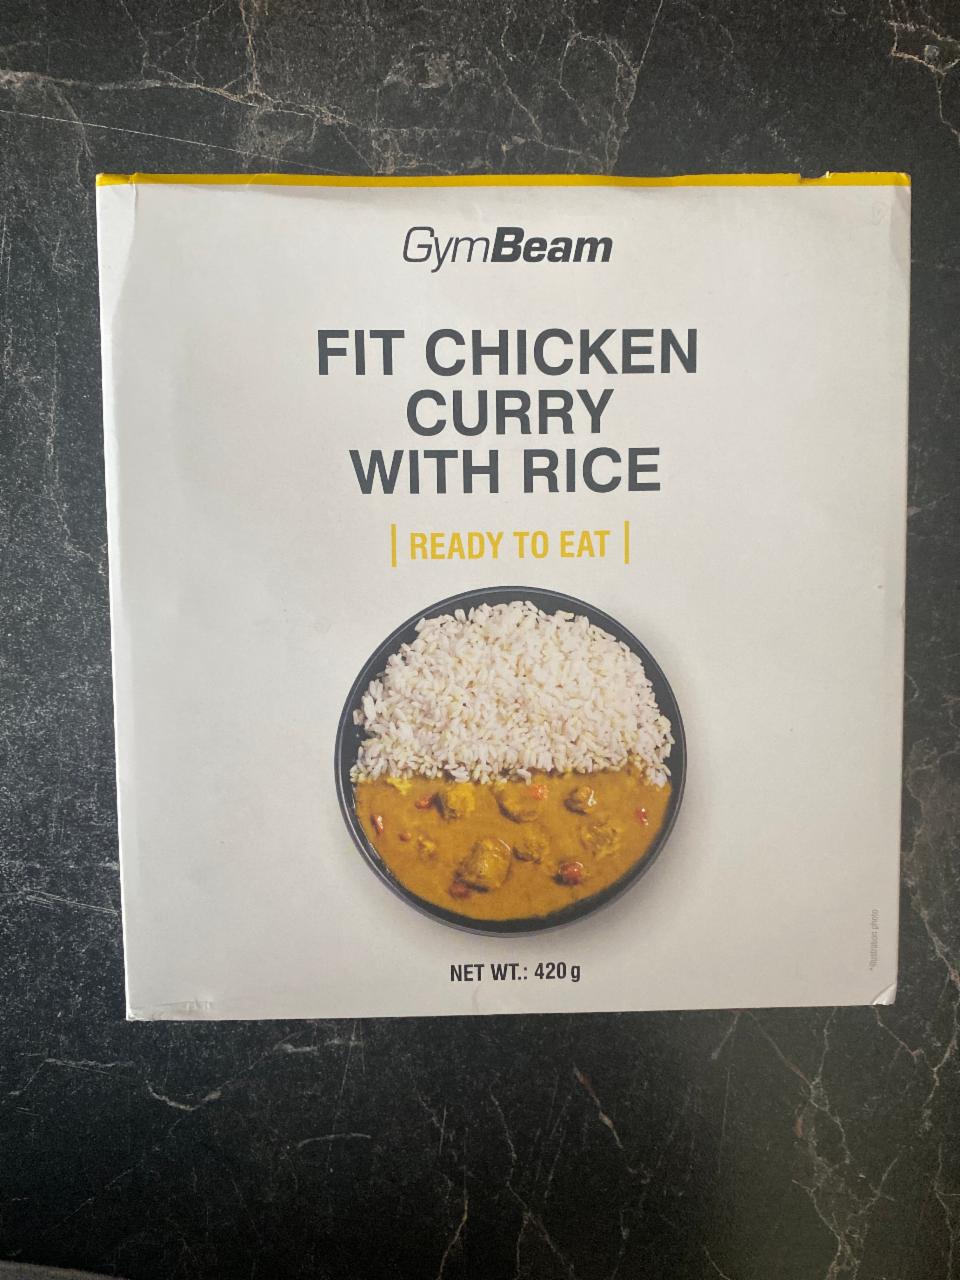 Képek - FIT CHICKEN CURRY WITH RICE GymBeam